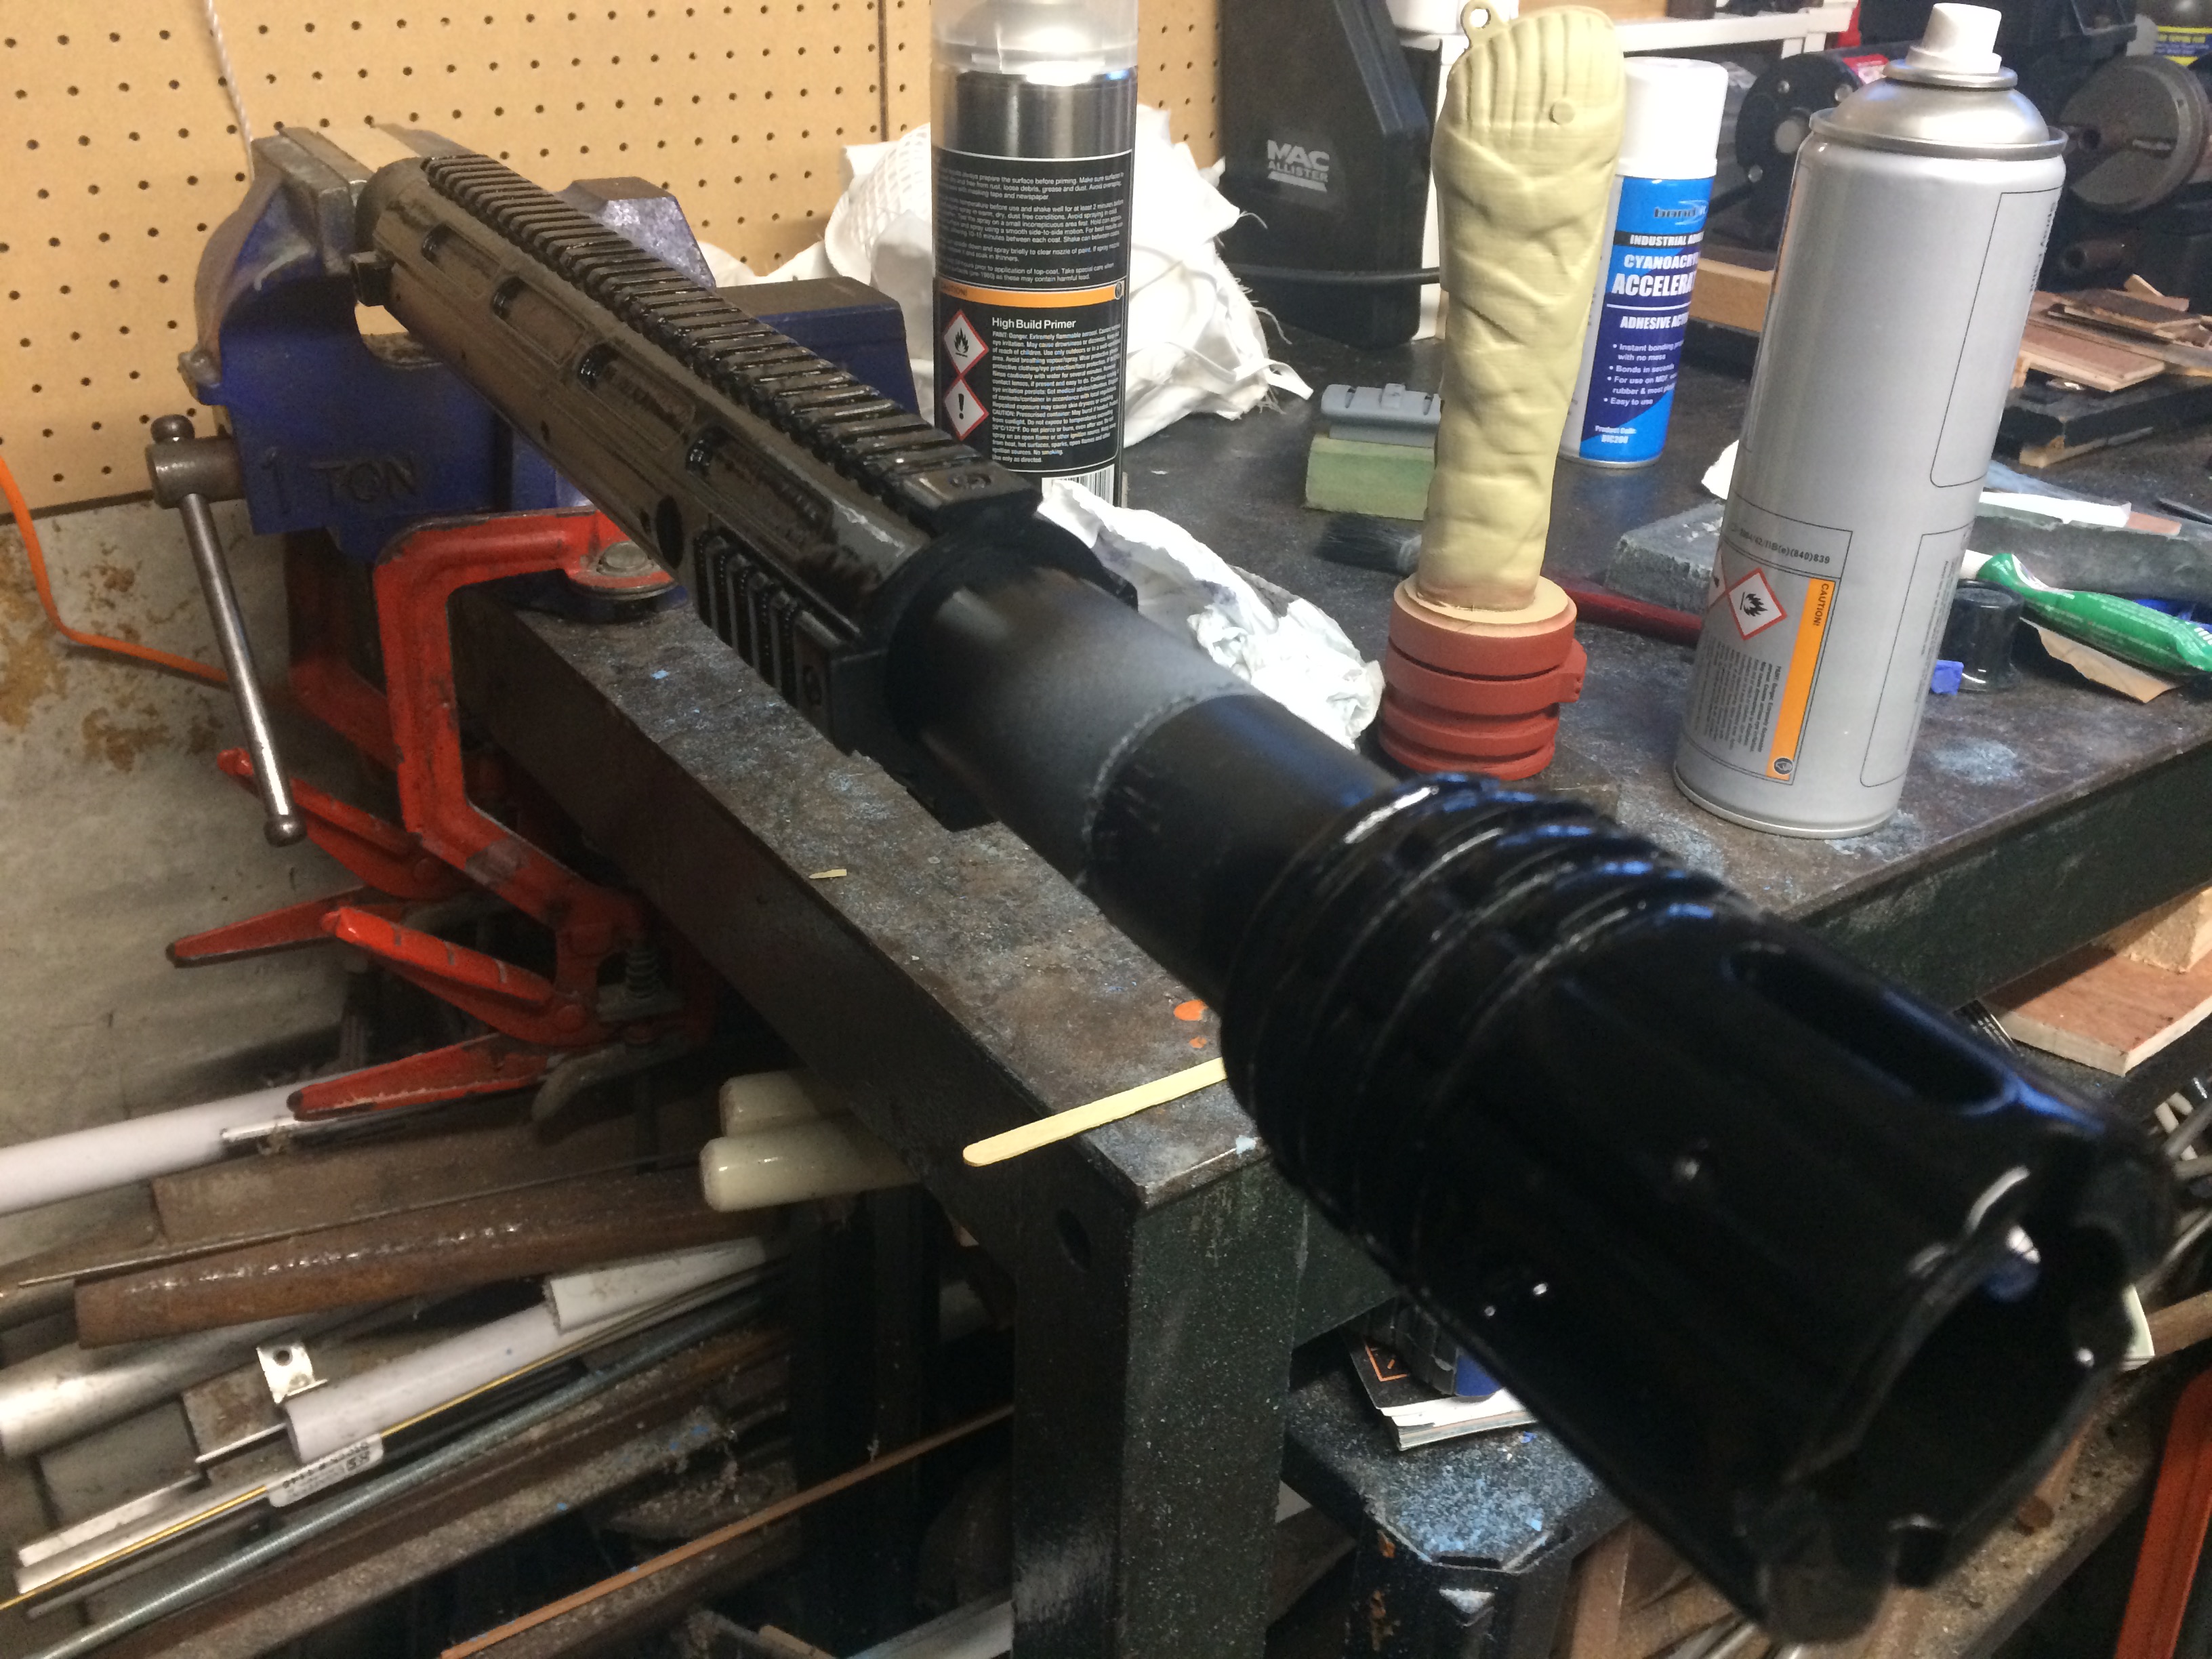 How to make replica of the 'Blunderbuss' from the movie Looper - Quora